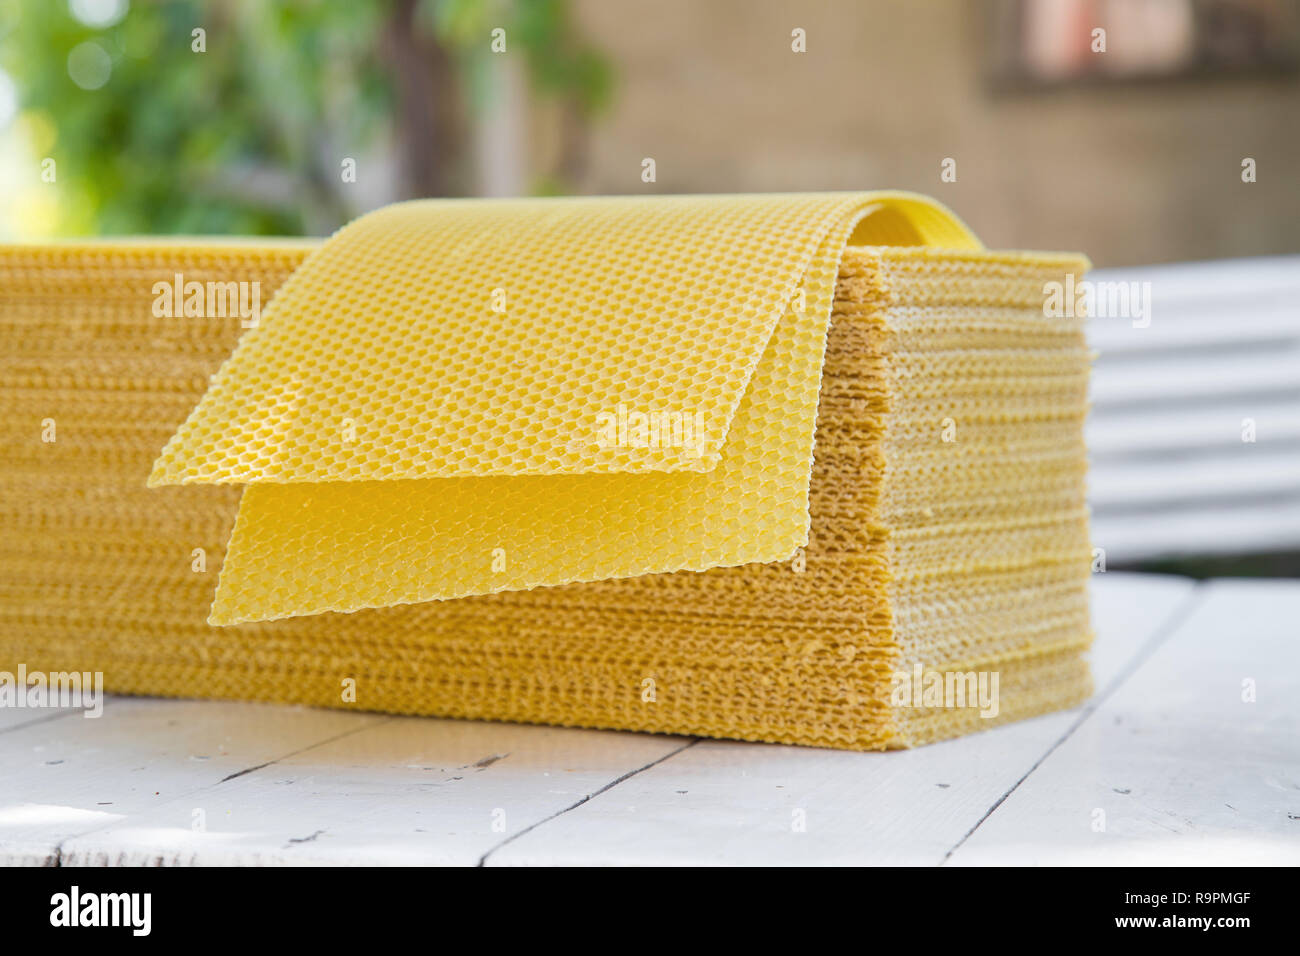 Plates of wax foundation - stack of apiary honeycomb base elements on wooden table. Image of basic beekeeping tools - wax foundation in rustic scenery Stock Photo